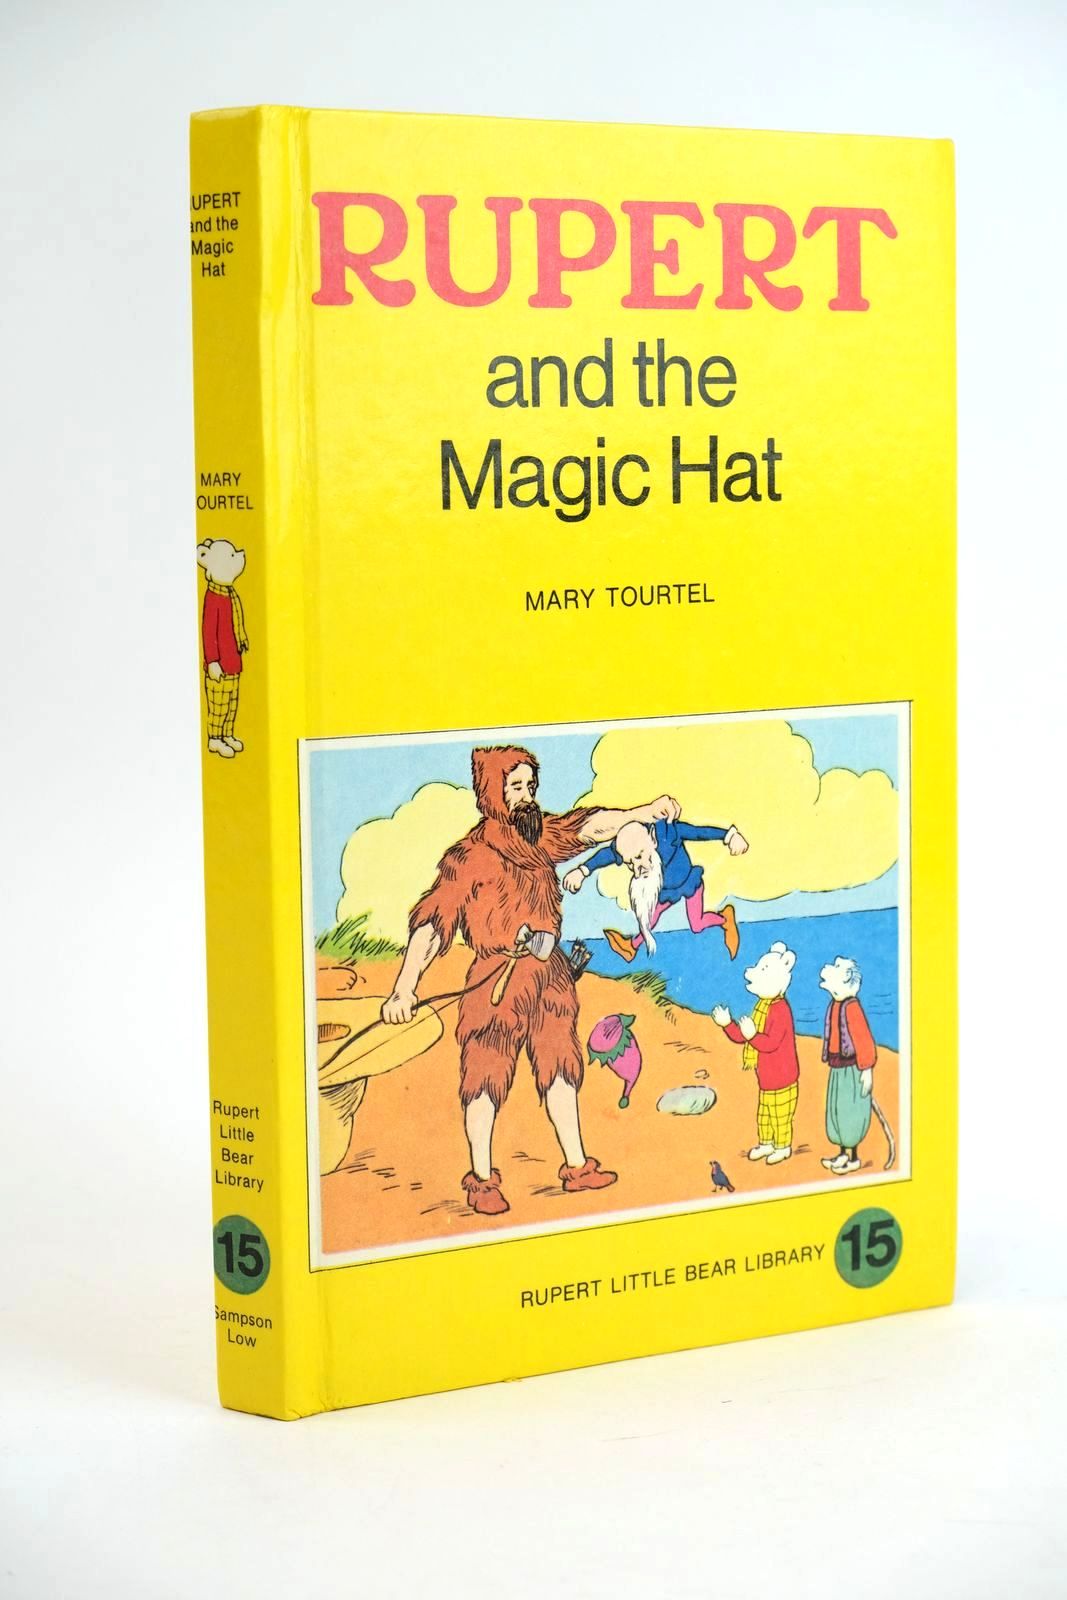 Photo of RUPERT AND THE MAGIC HAT - RUPERT LITTLE BEAR LIBRARY No. 15 (WOOLWORTH) written by Tourtel, Mary illustrated by Tourtel, Mary published by Sampson Low, Marston & Co. Ltd. (STOCK CODE: 1323462)  for sale by Stella & Rose's Books